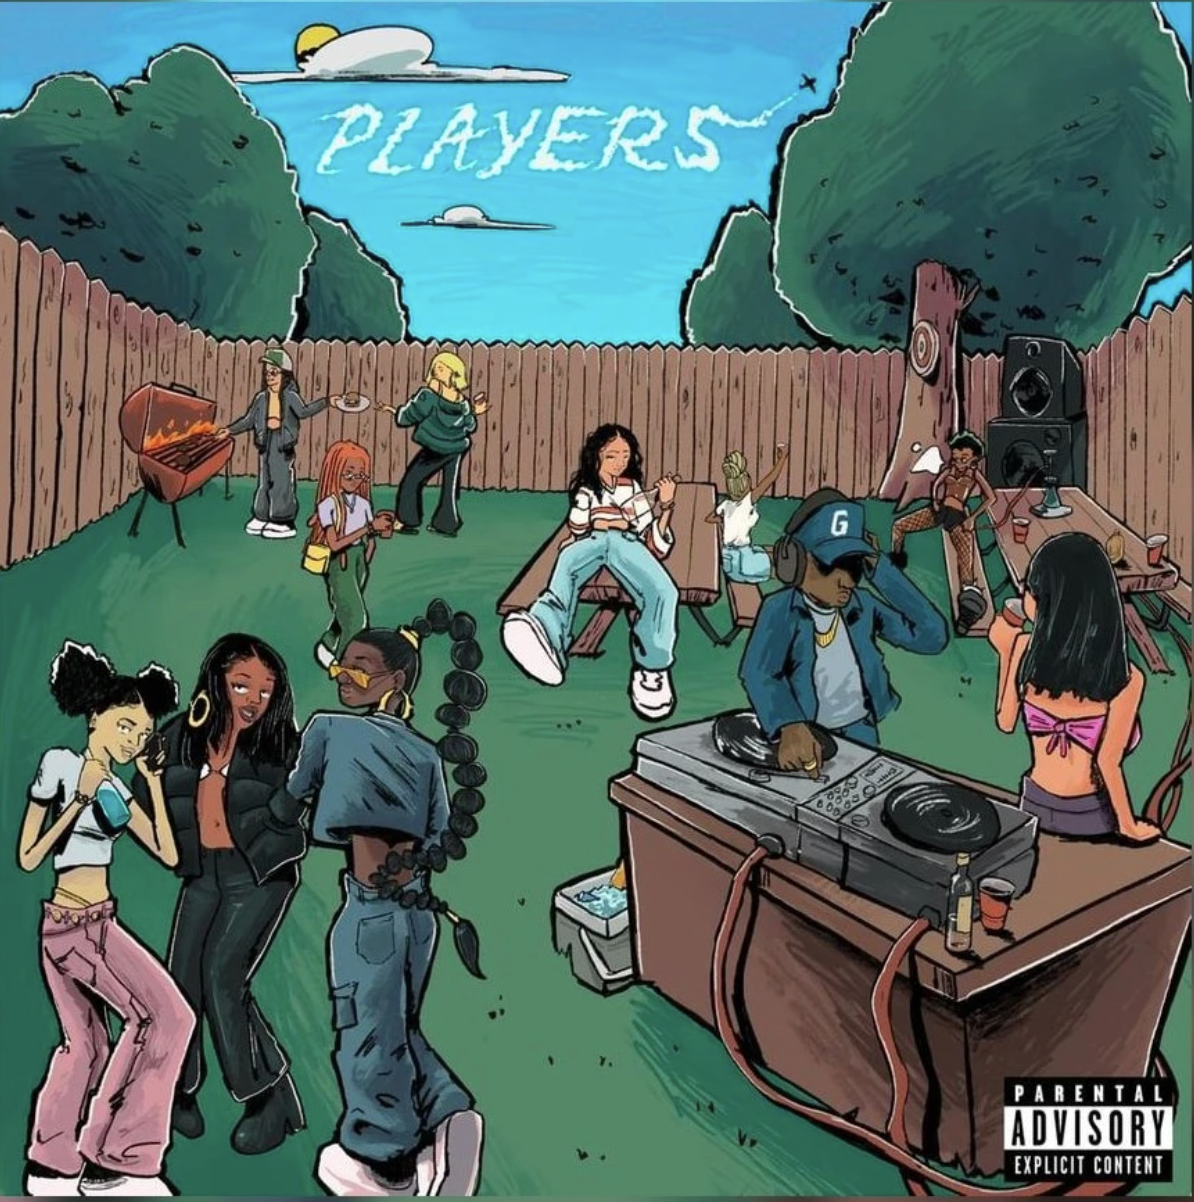 Coi Leray Channels Grandmaster Flash In “Players”